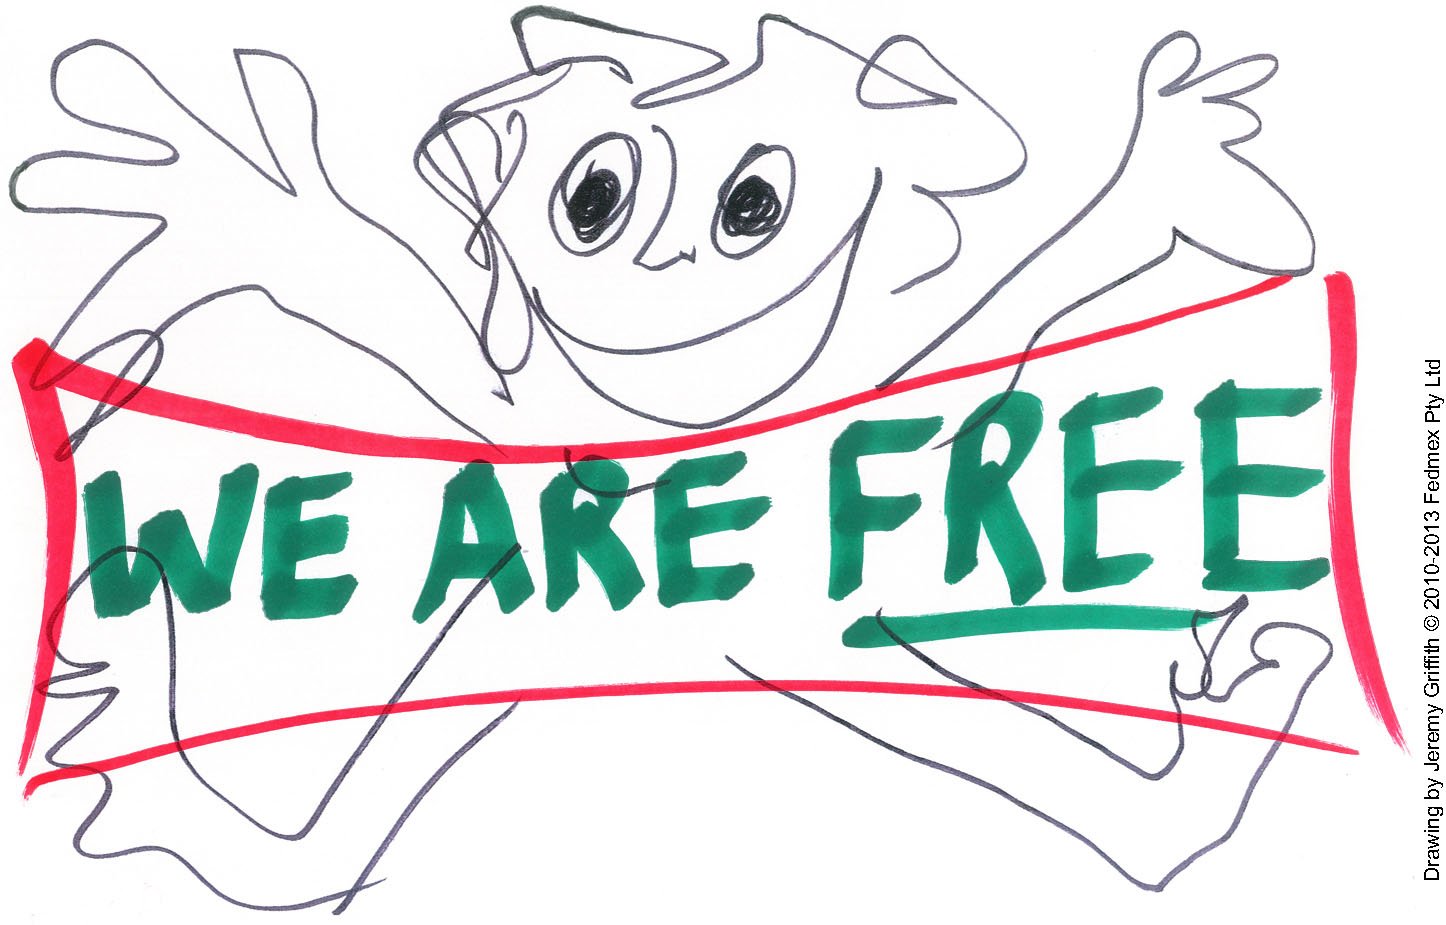 We Are Free!